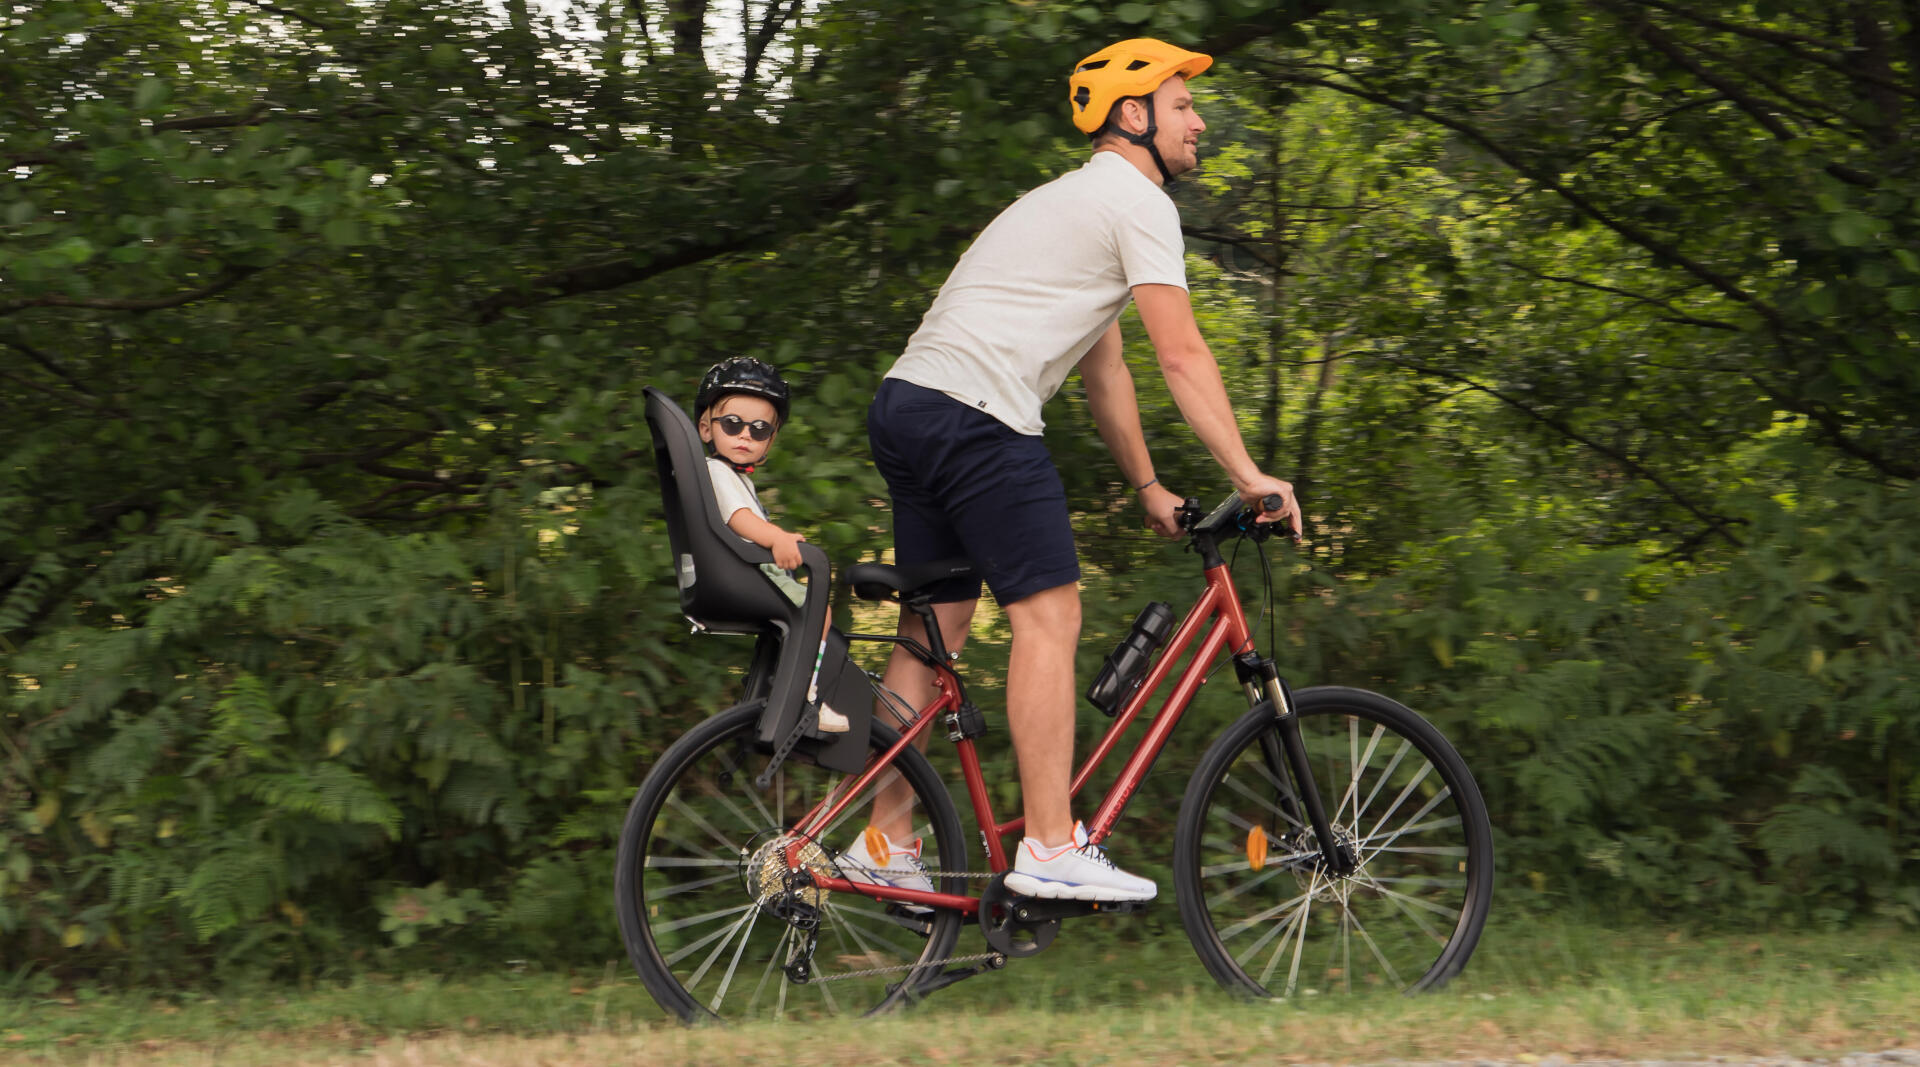 Our tips for planning your first family cycling microadventure